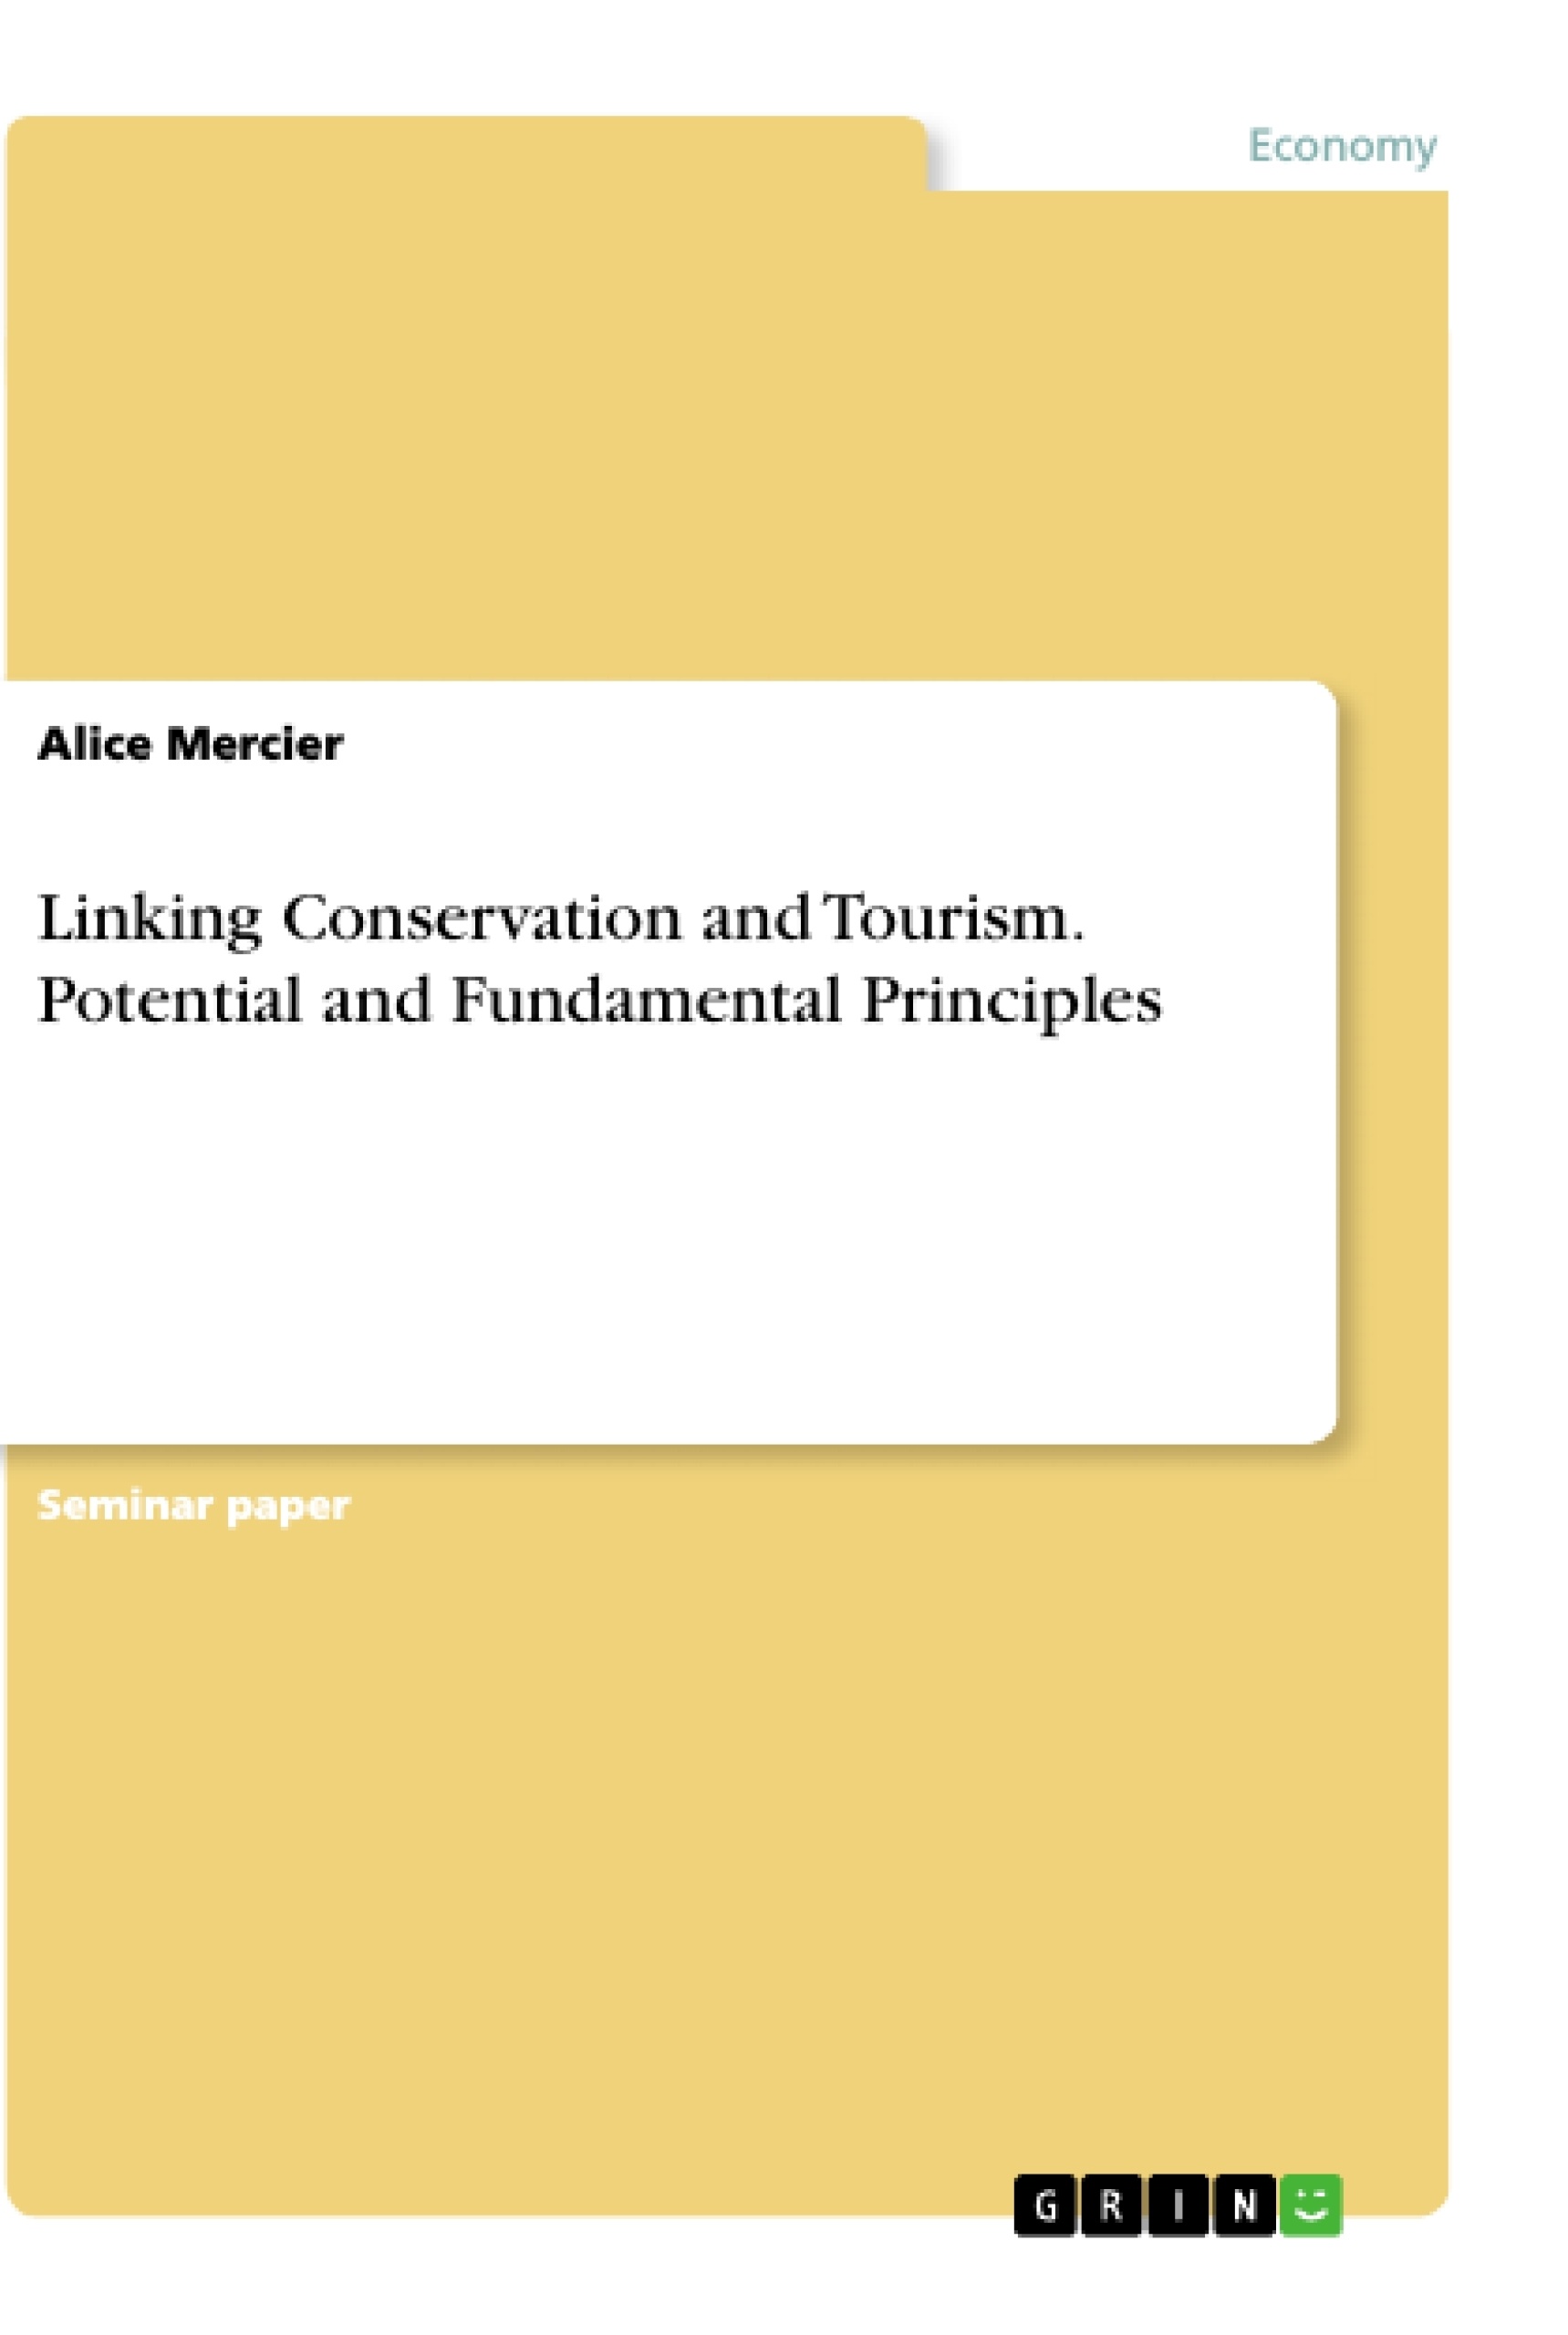 Title: Linking Conservation and Tourism. Potential and Fundamental Principles